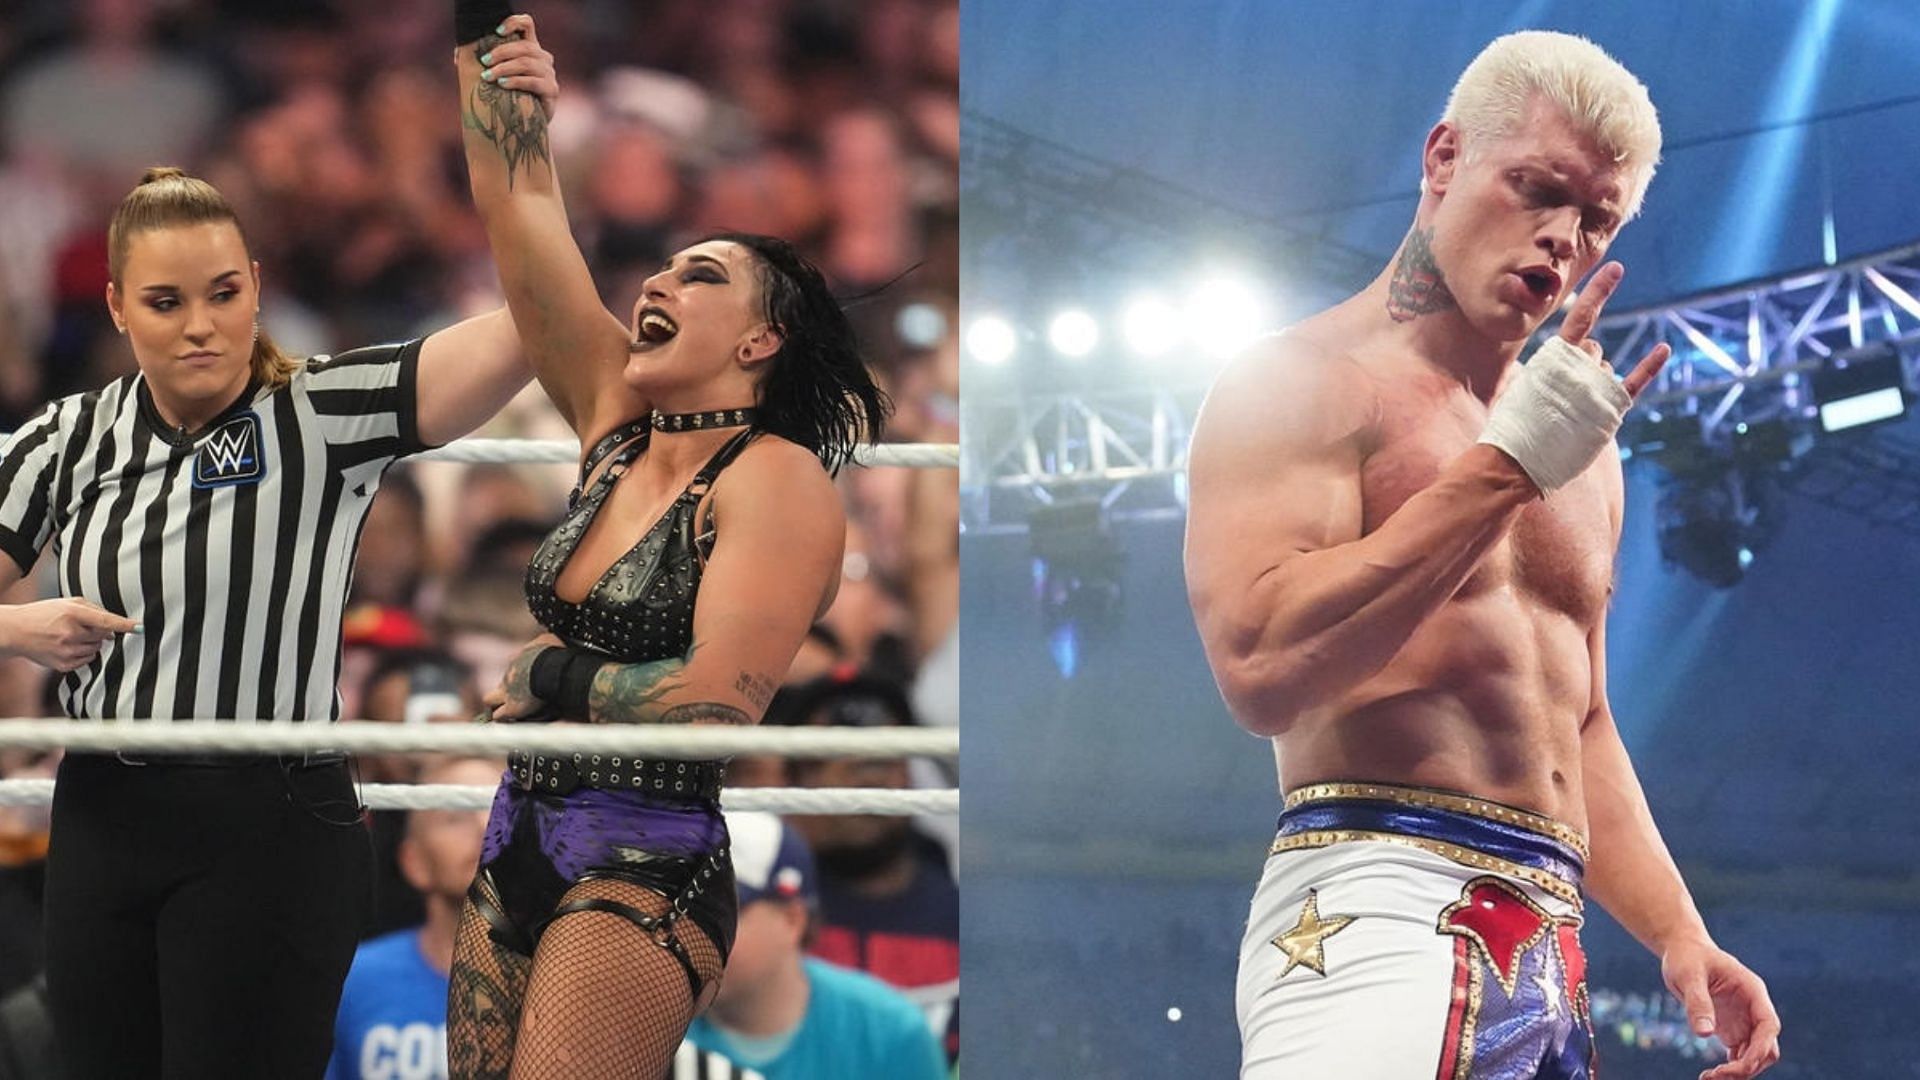 Rhea Ripley and Cody Rhodes suffered injuries at the WWE Royal Rumble 2023.